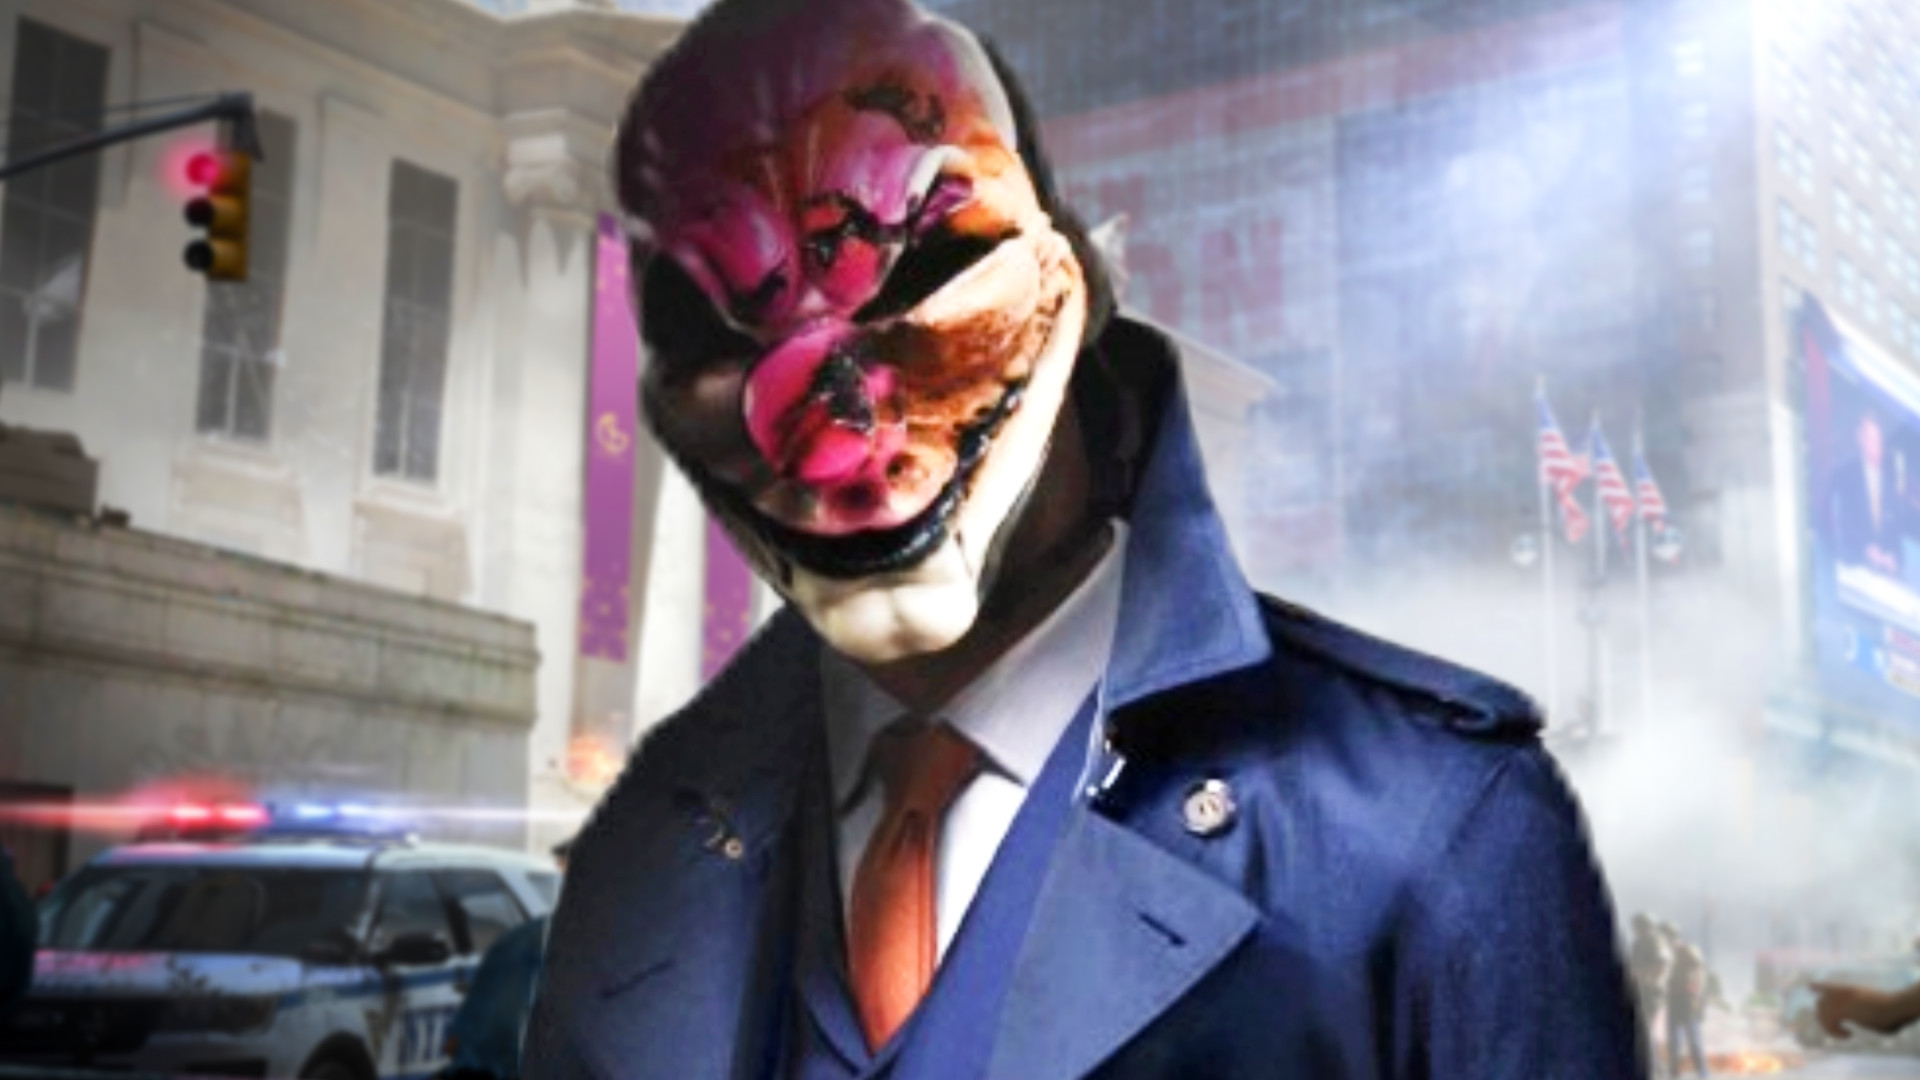 Massive' Payday 3 Update Hits Xbox Game Pass, Here Are The Full 1.01 Patch  Notes